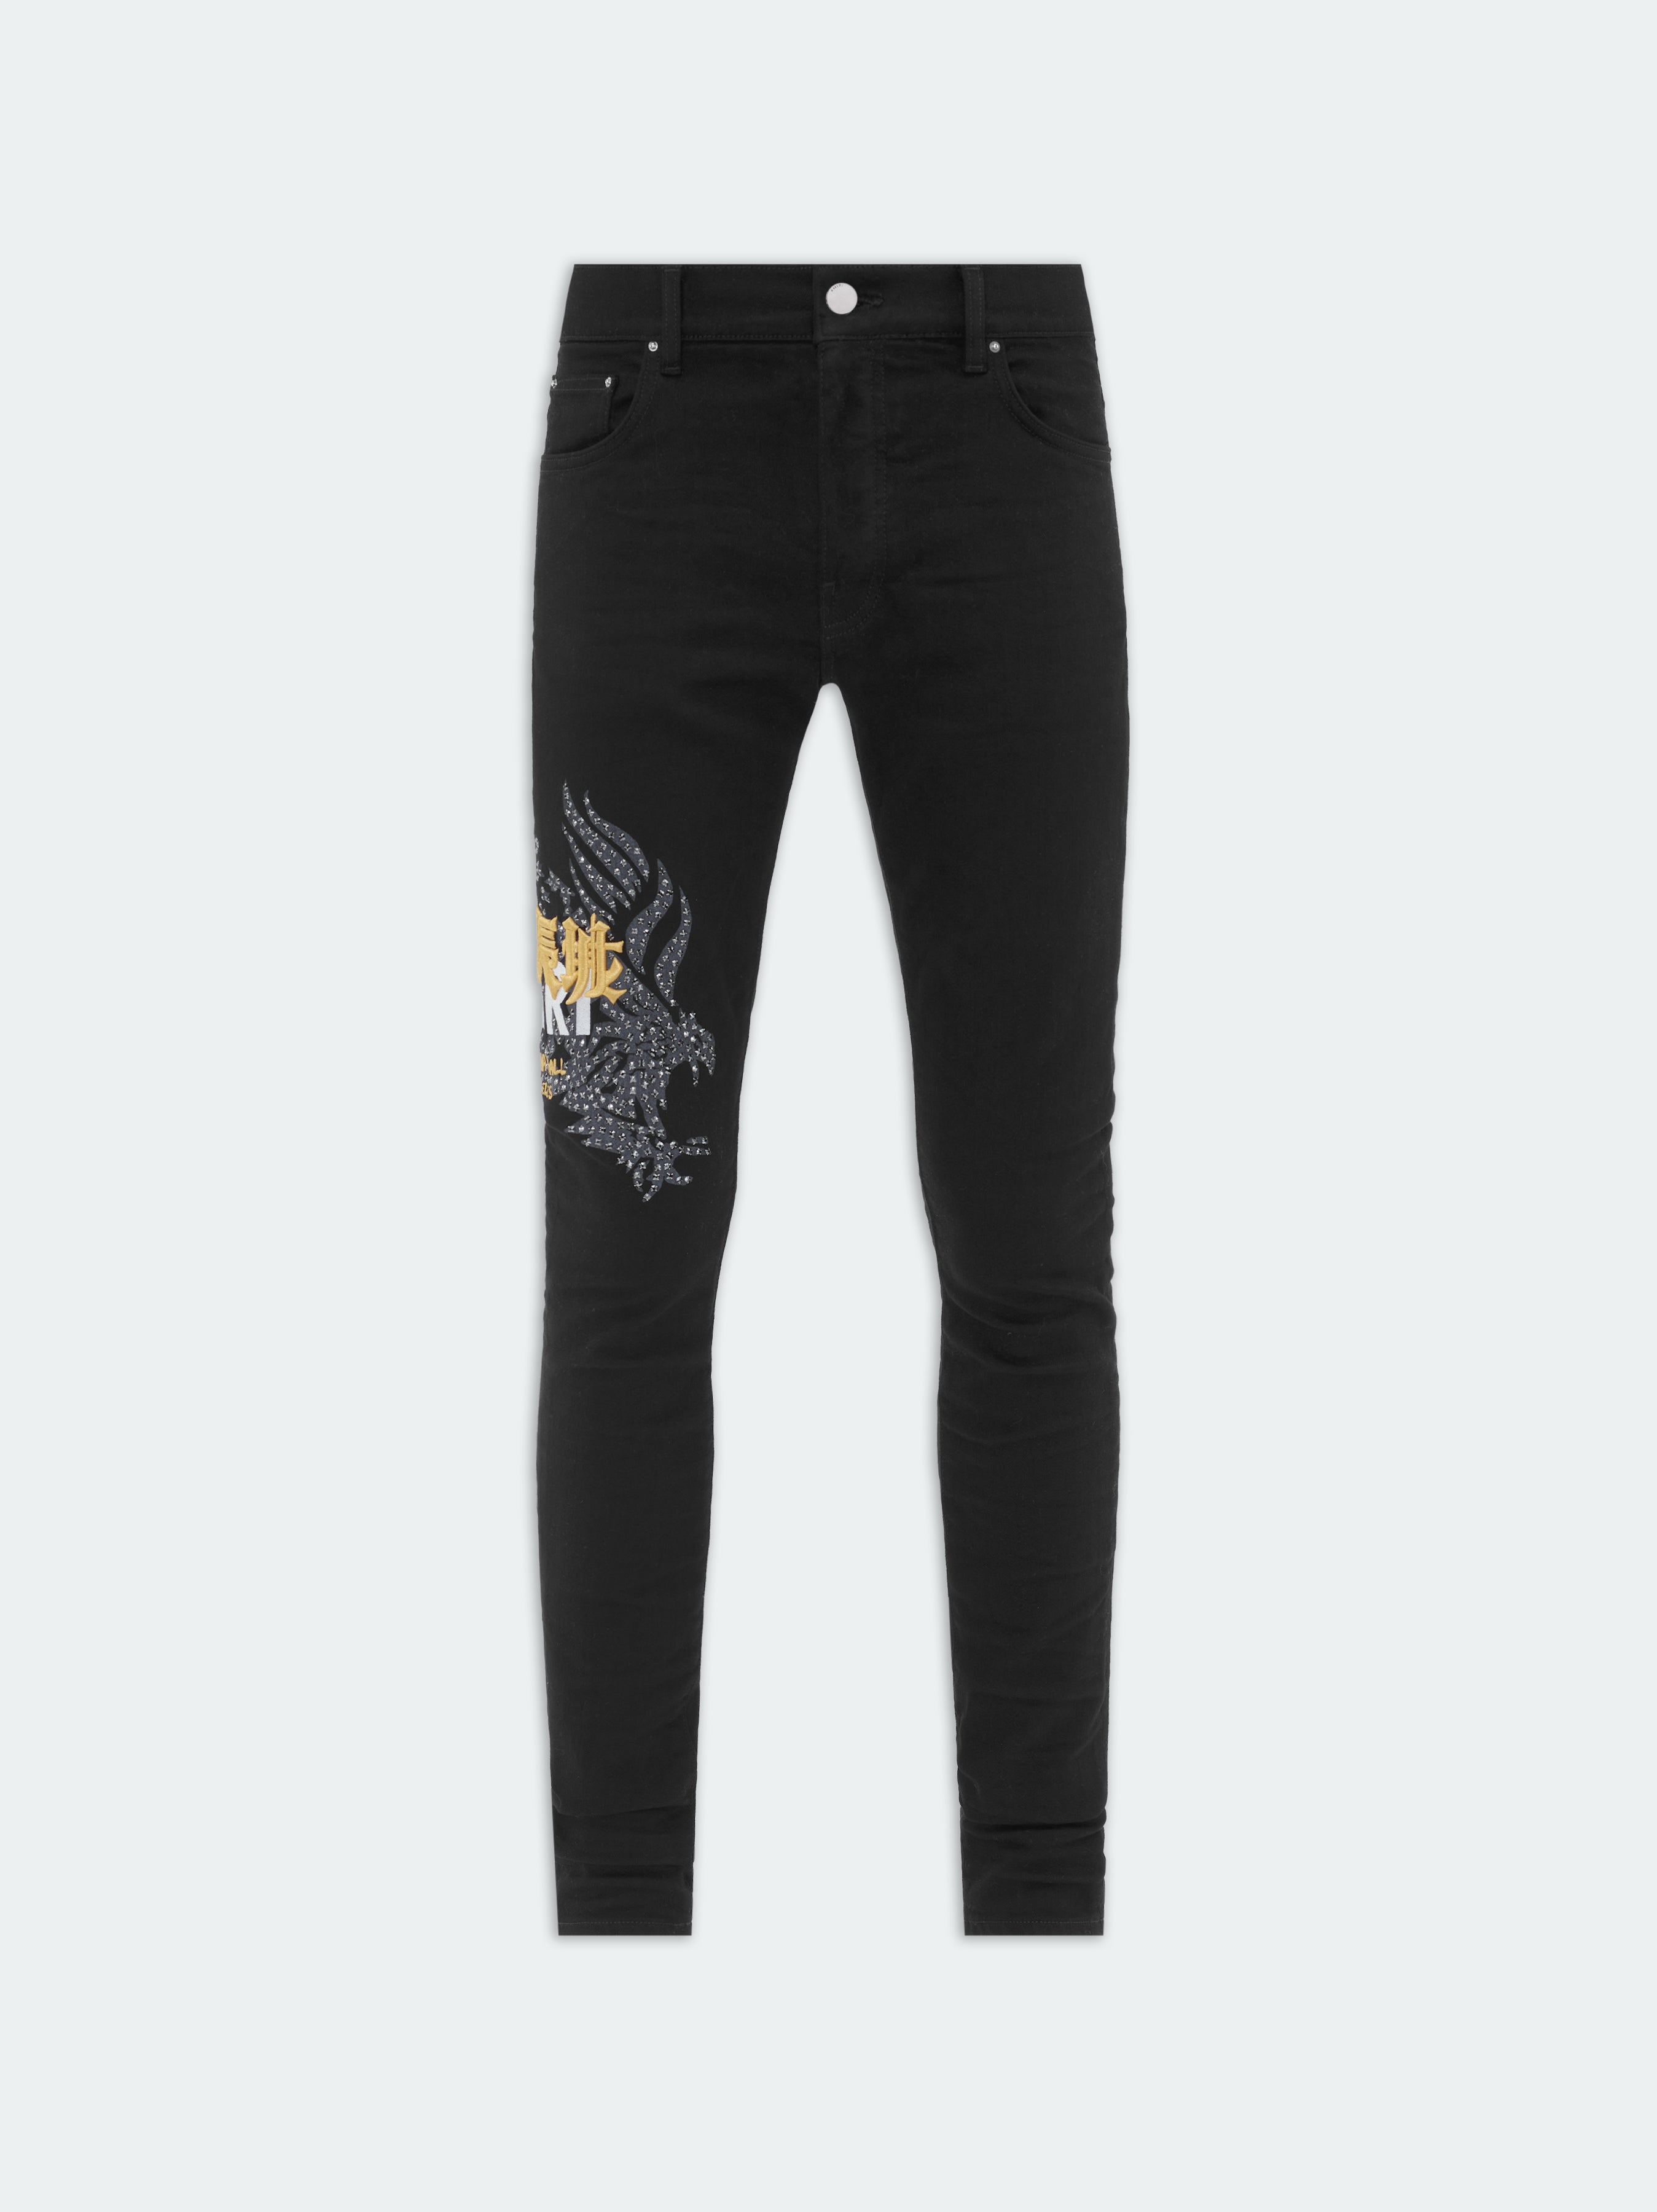 Product TGCW CRYSTAL SKINNY JEAN - BLACK featured image